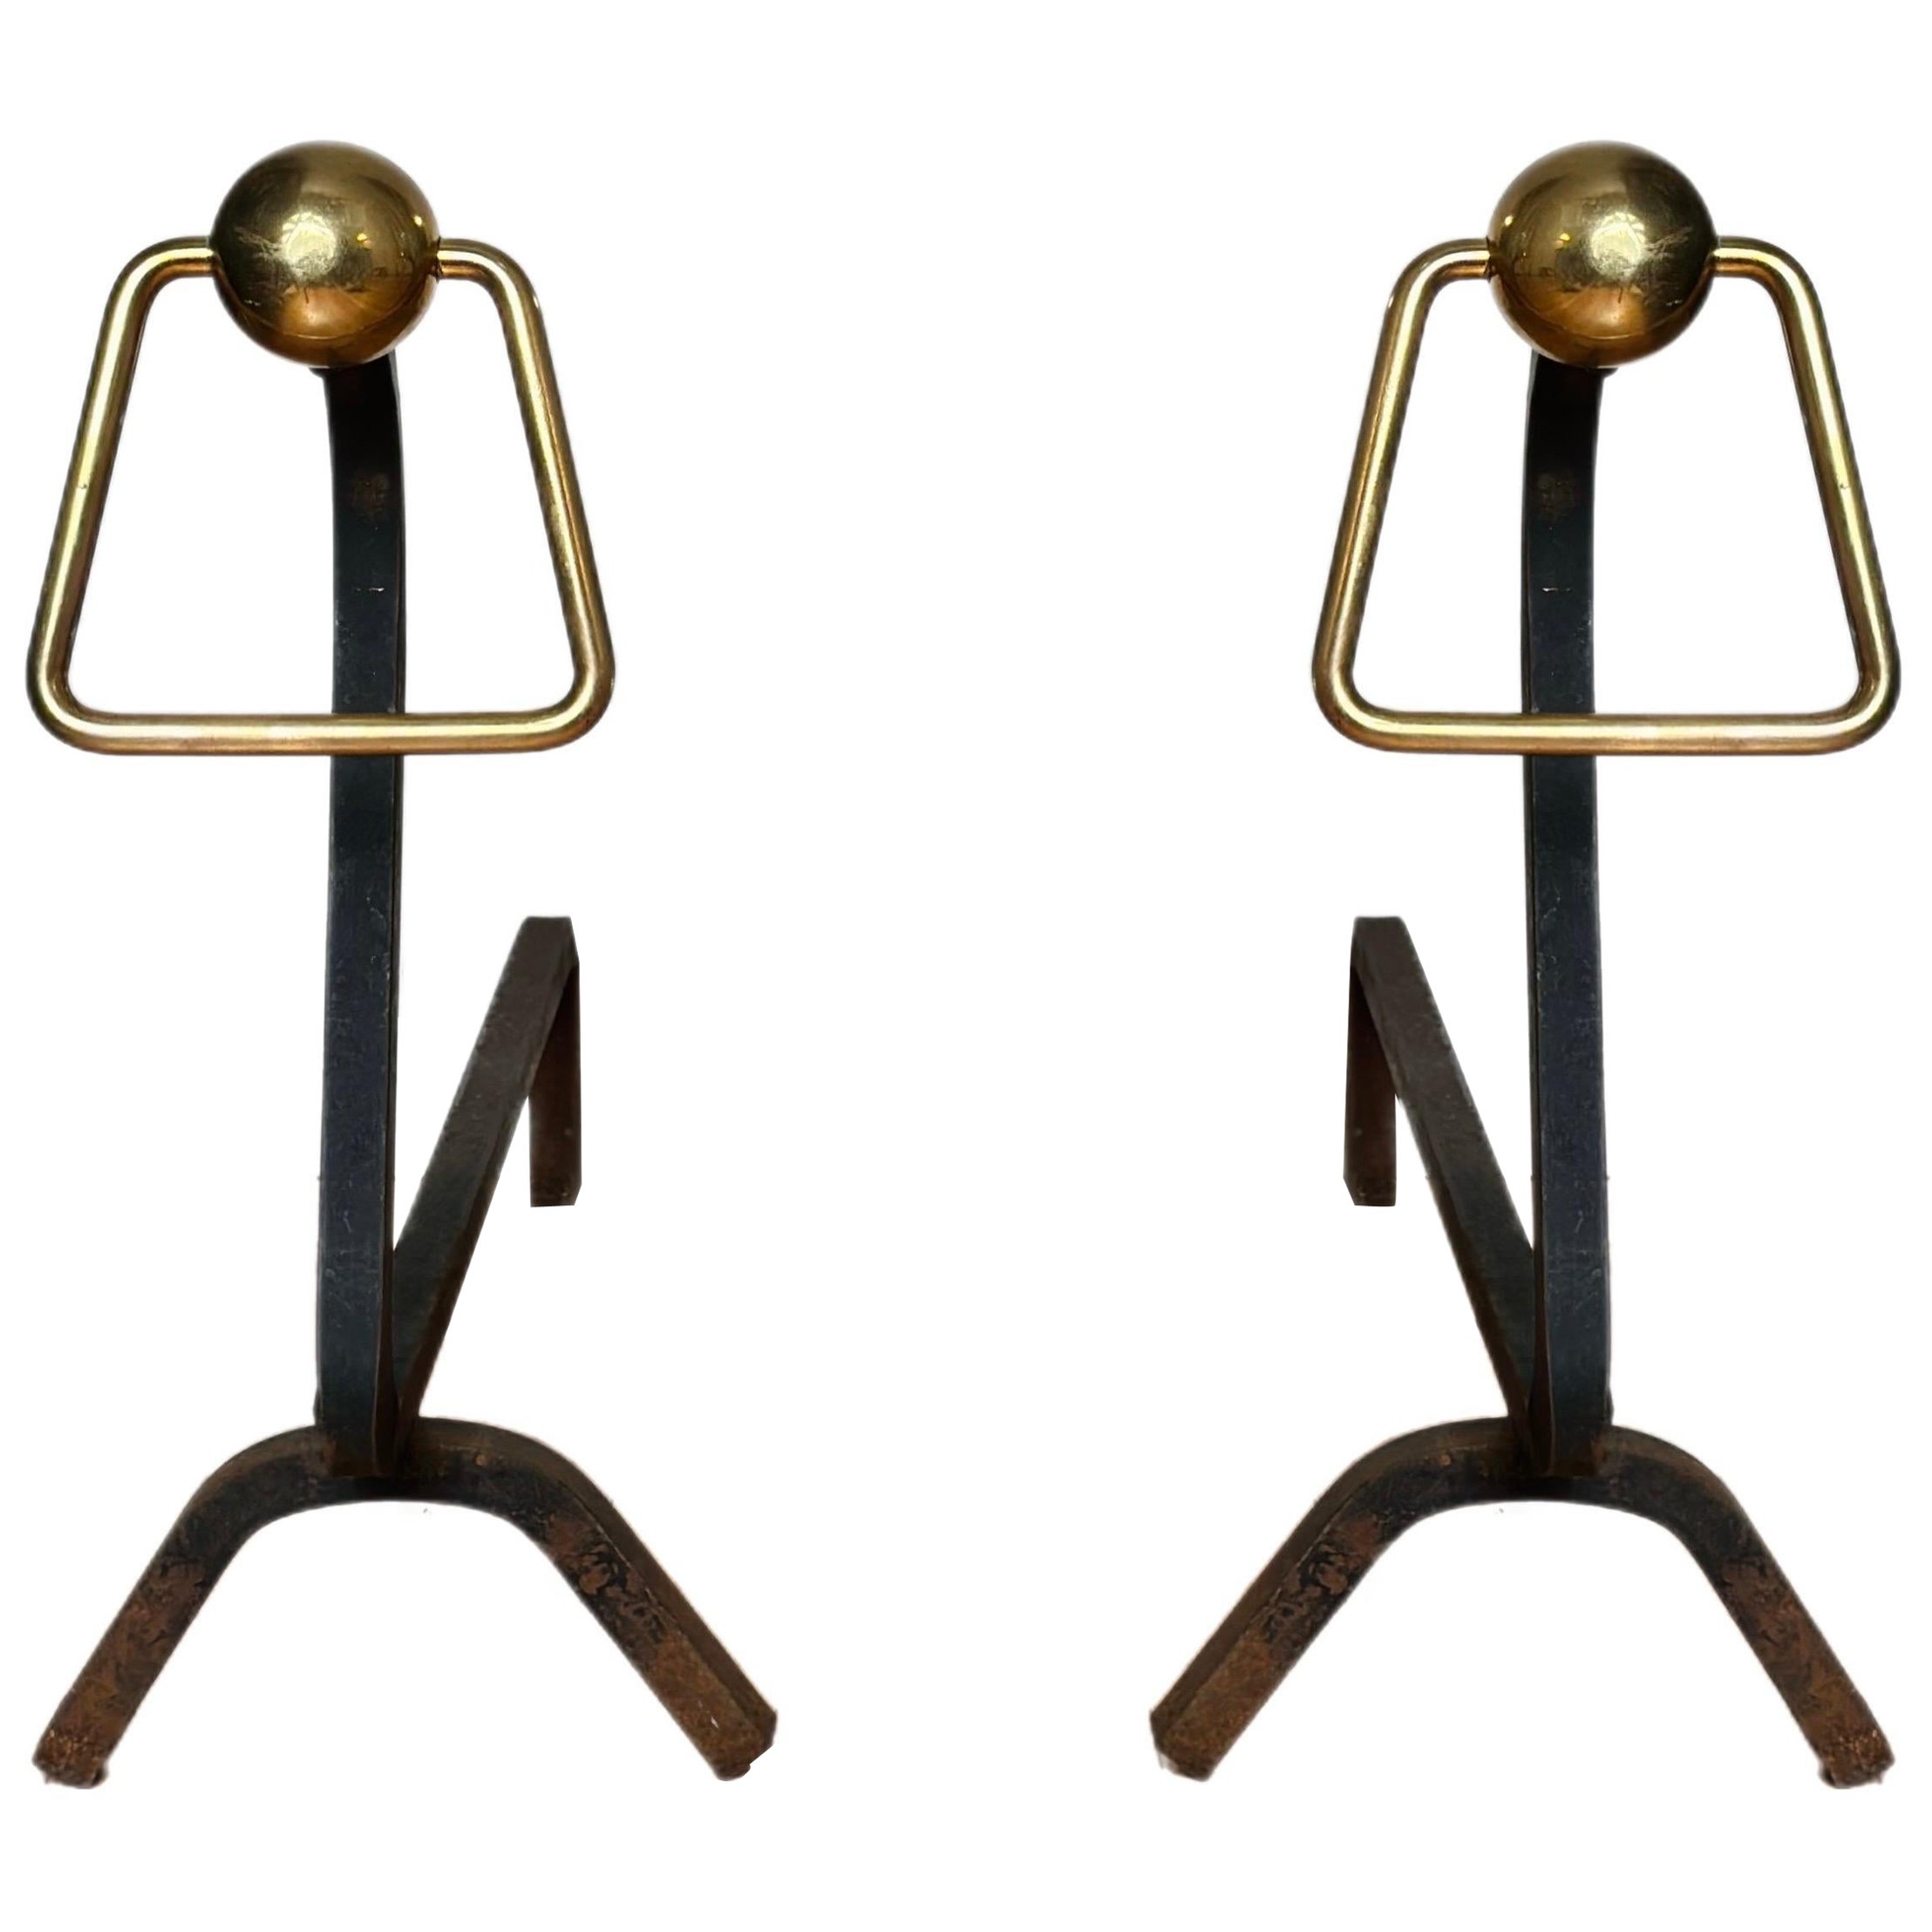 1940s Modernist Jacques Adnet Style Wrought Iron and Brass Andirons - a Pair For Sale